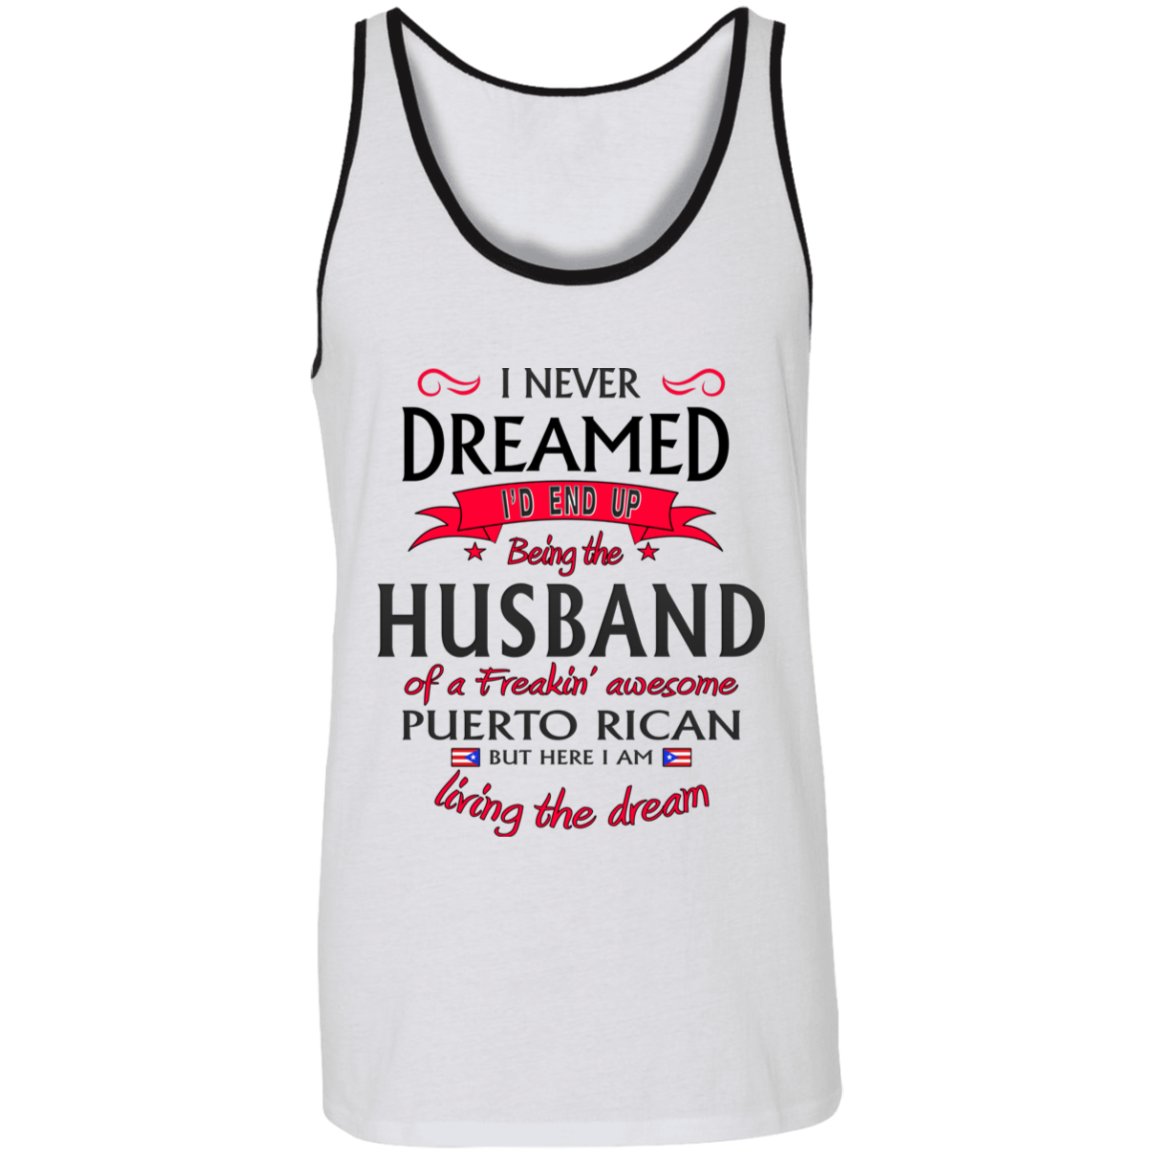 Husband of Awesome PR Unisex Tank - Puerto Rican Pride